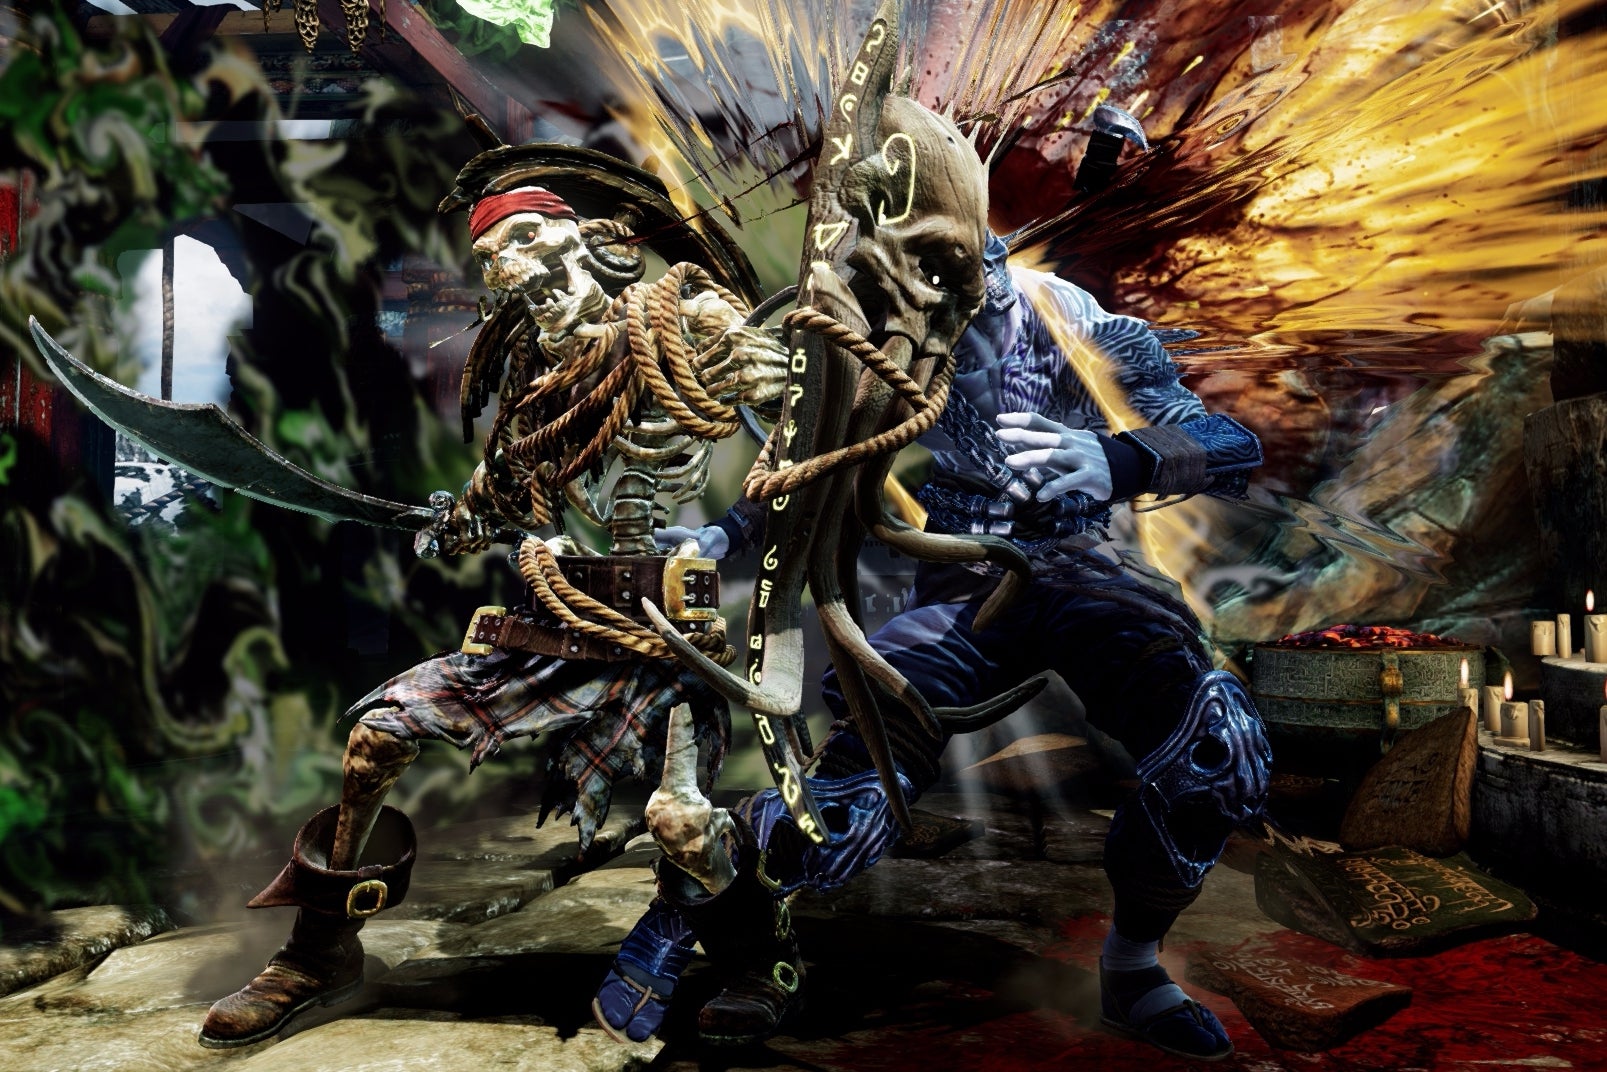 Image for Killer Instinct on Steam supports cross-platform play with Xbox One and Windows 10